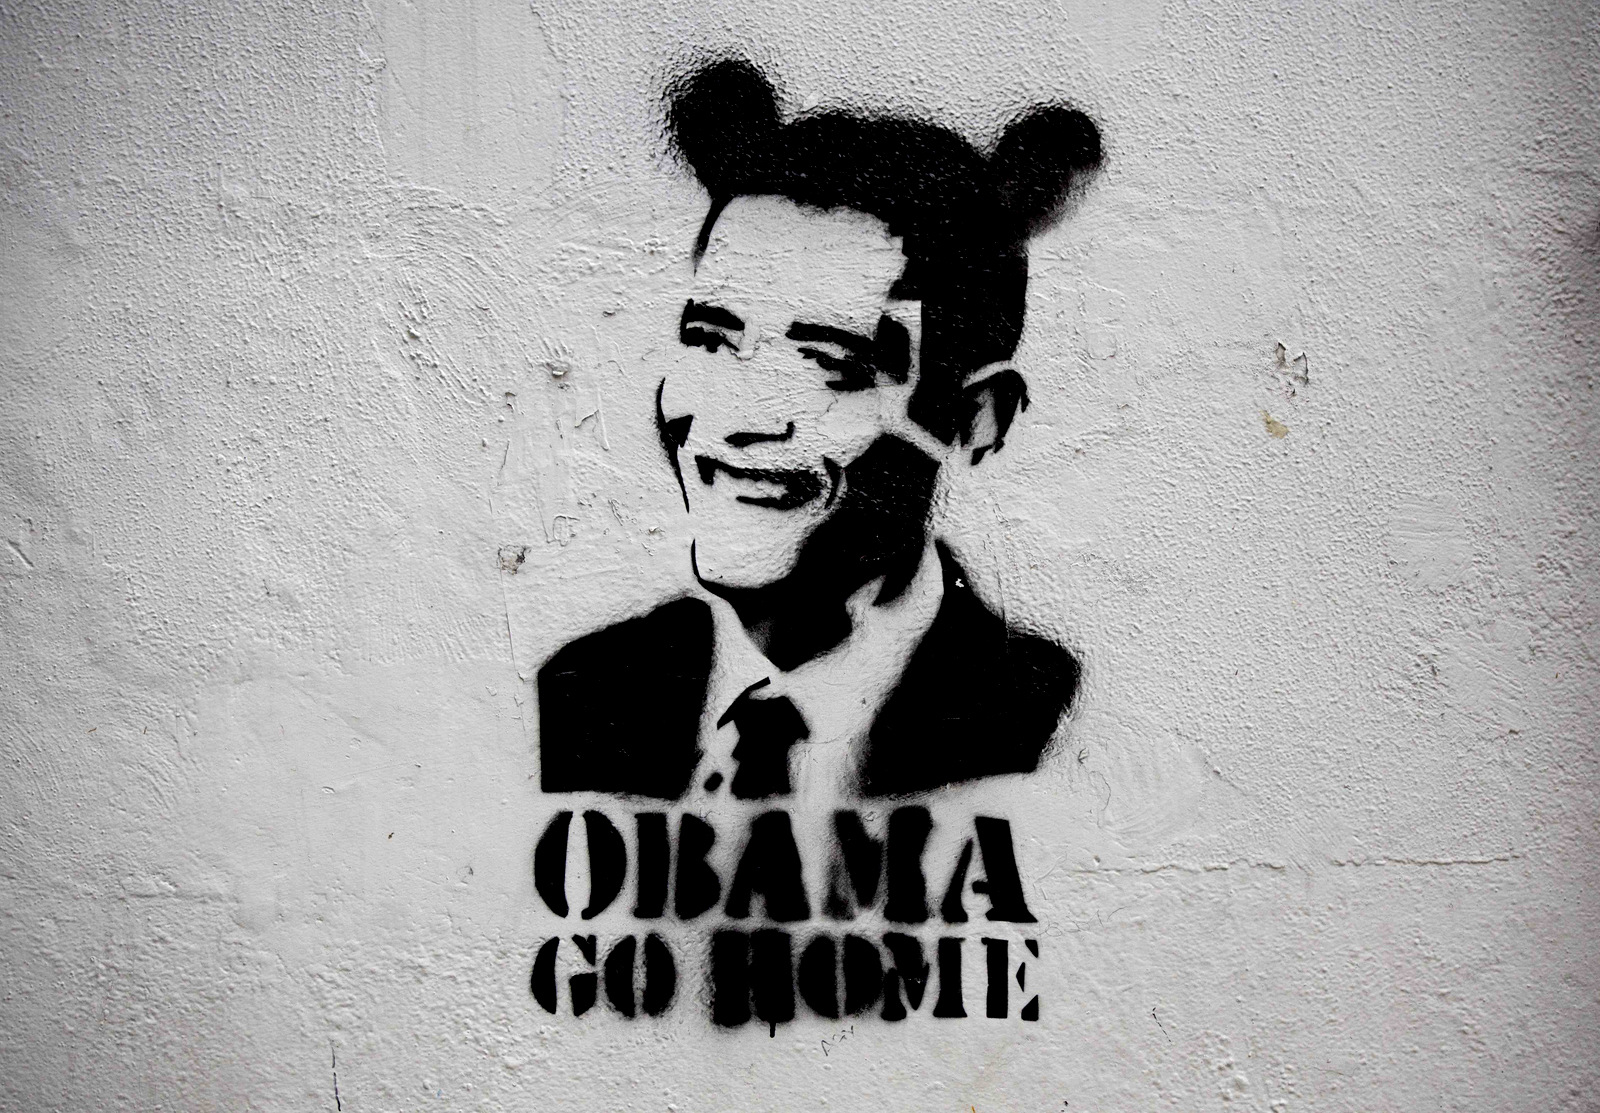 An image of President Barack Obama wearing fake ears and the slogan "Obama go home" on a street wall in Caracas, Venezuela. Venezuelan President Nicolas Maduro regularly sets social media afire with support, with heavily trending anti-U.S. campaigns such #ObamaYankeeGoHome and #ObamaRepealTheExecutiveOrder, which denounced U.S. sanctions on members of Maduro’s administration. (AP/Ariana Cubillos)